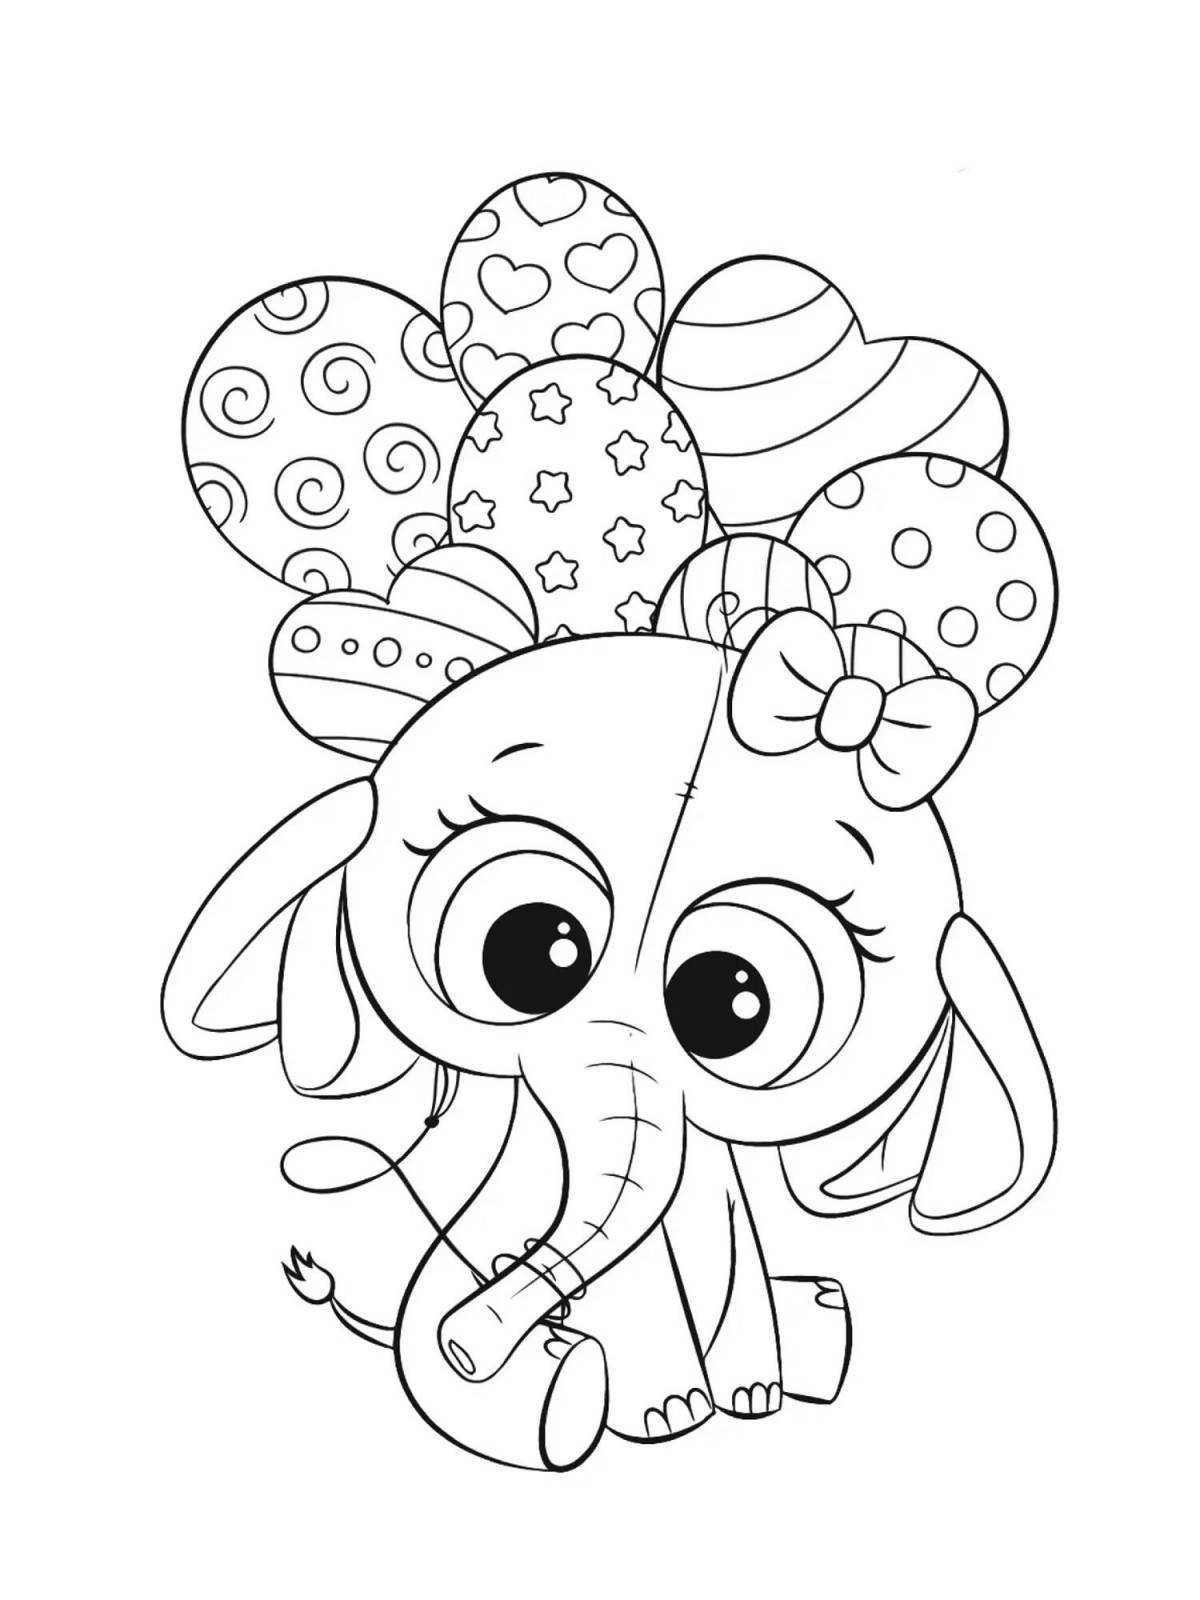 Soft coloring cute animals for kids